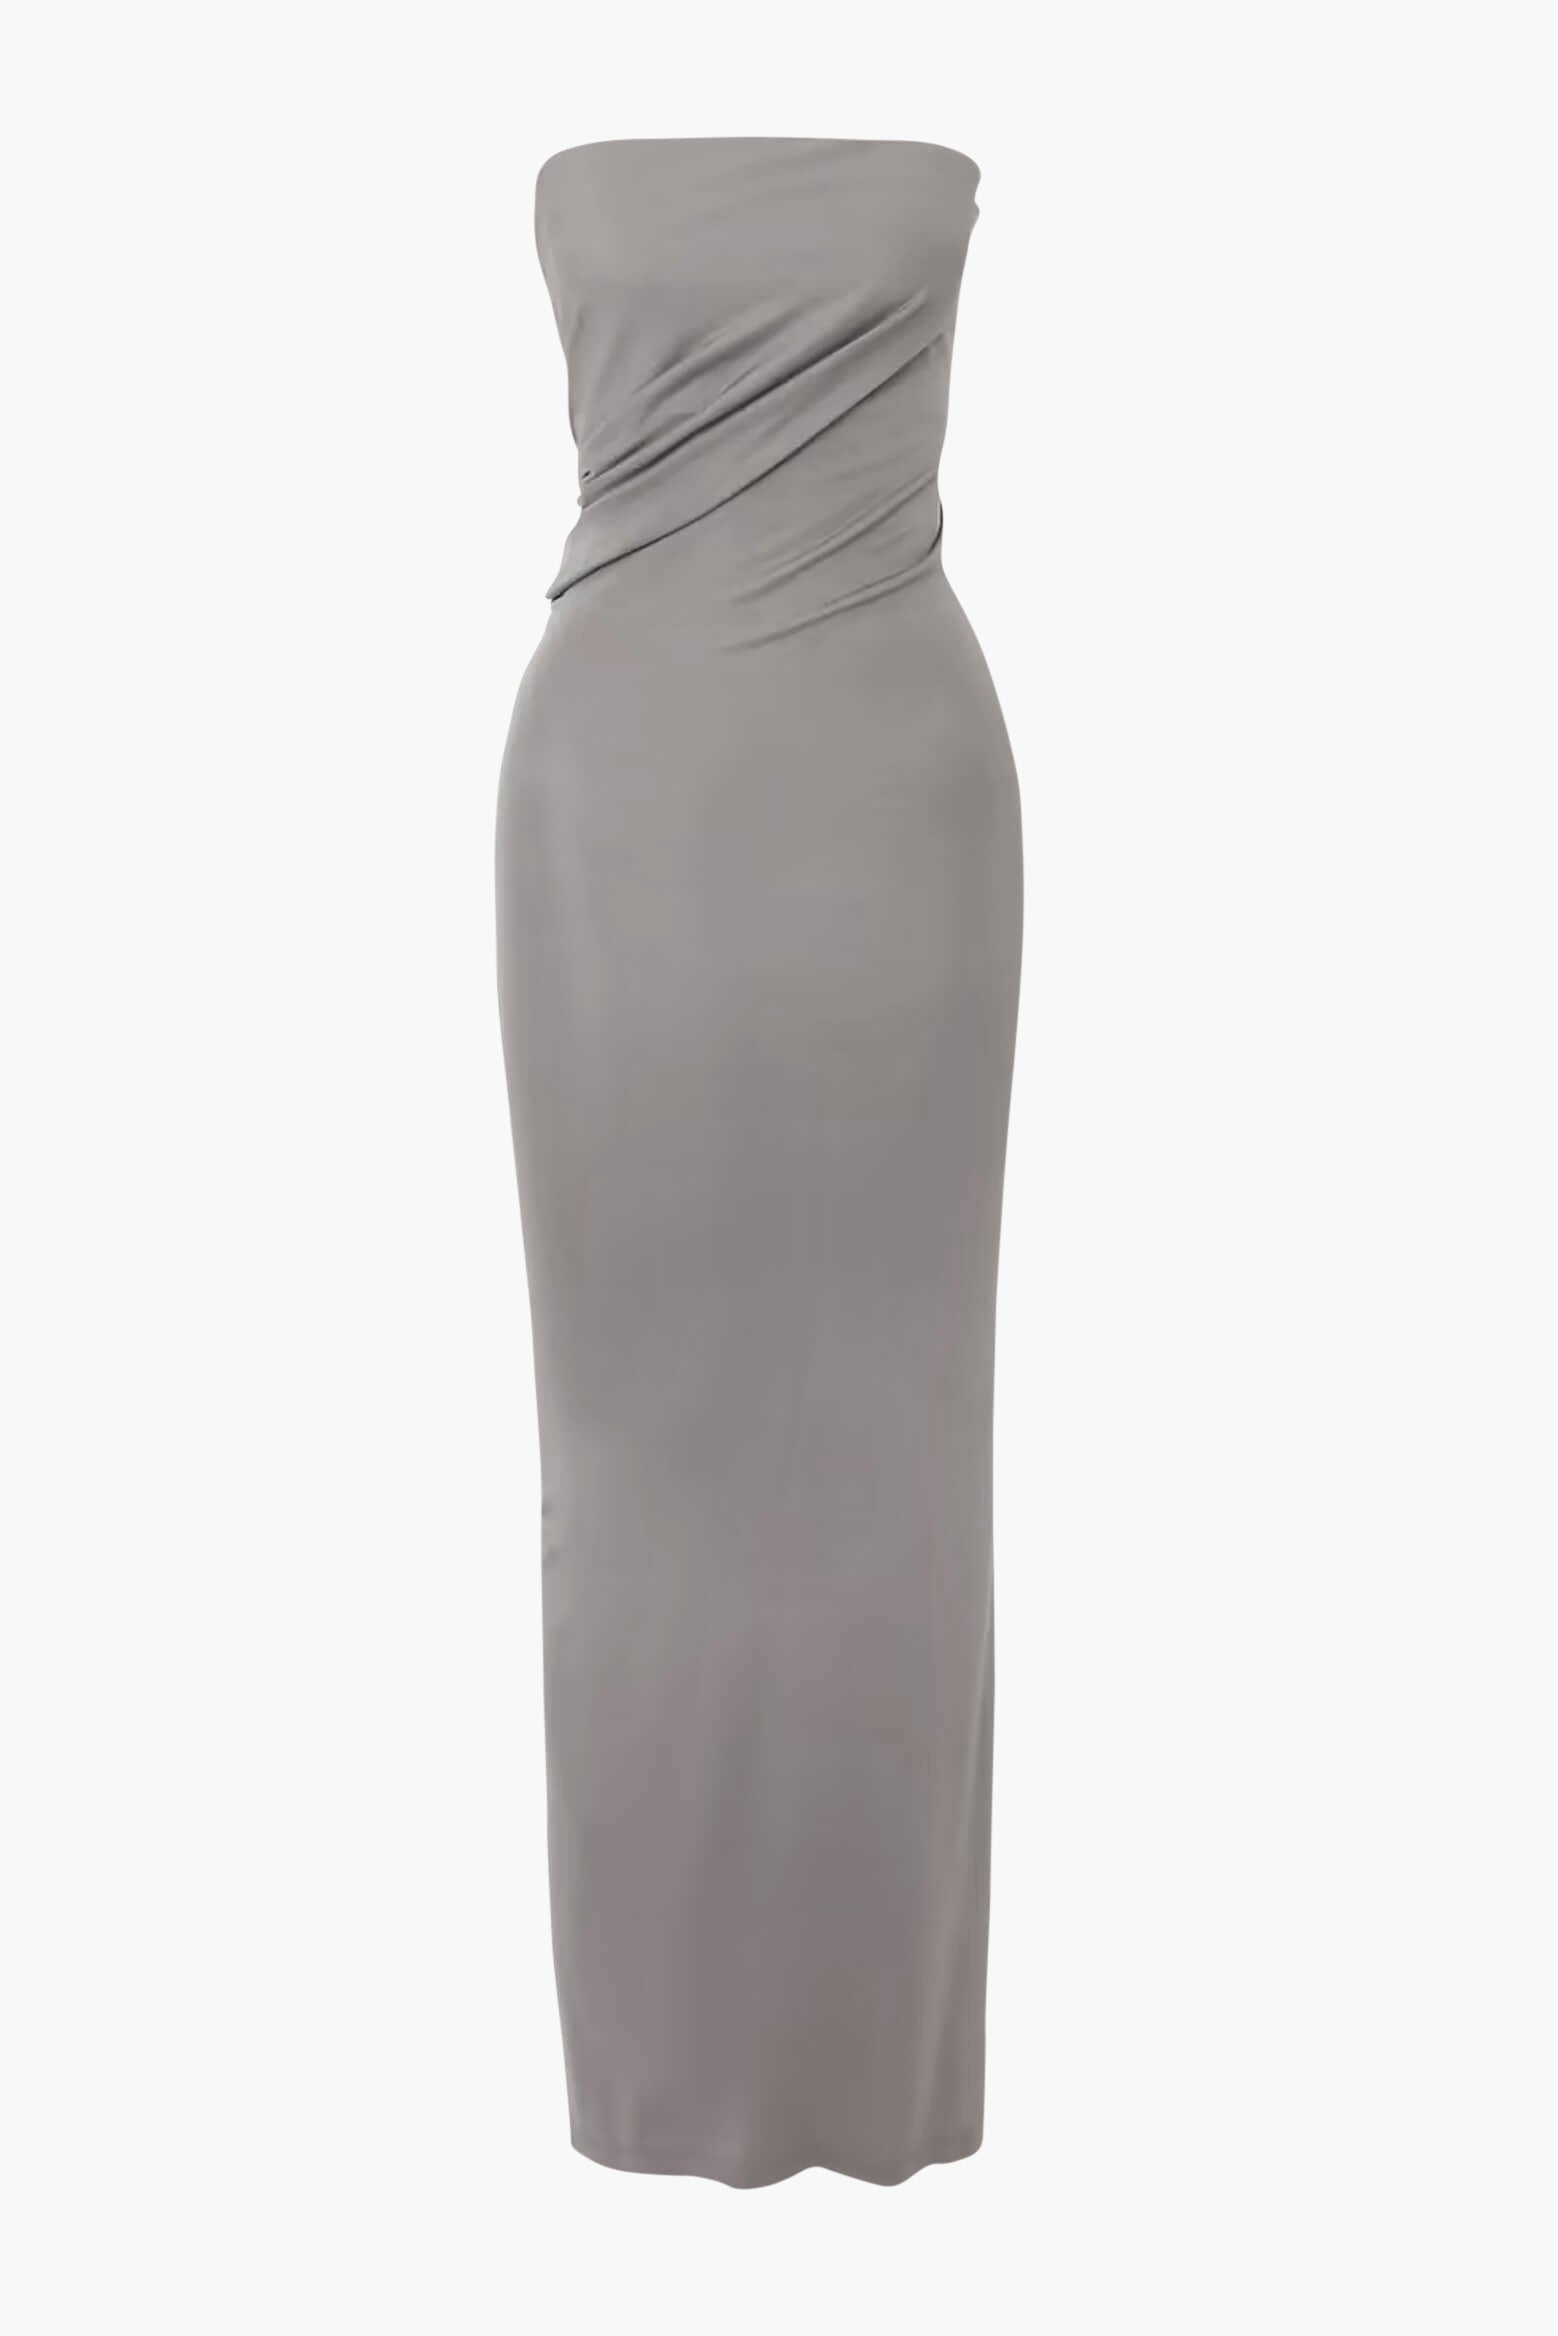 Christopher Esber Strapless Ruche Dress in Concrete available at TNT The New Trend Australia. Free shipping on orders over $300 AUD.'